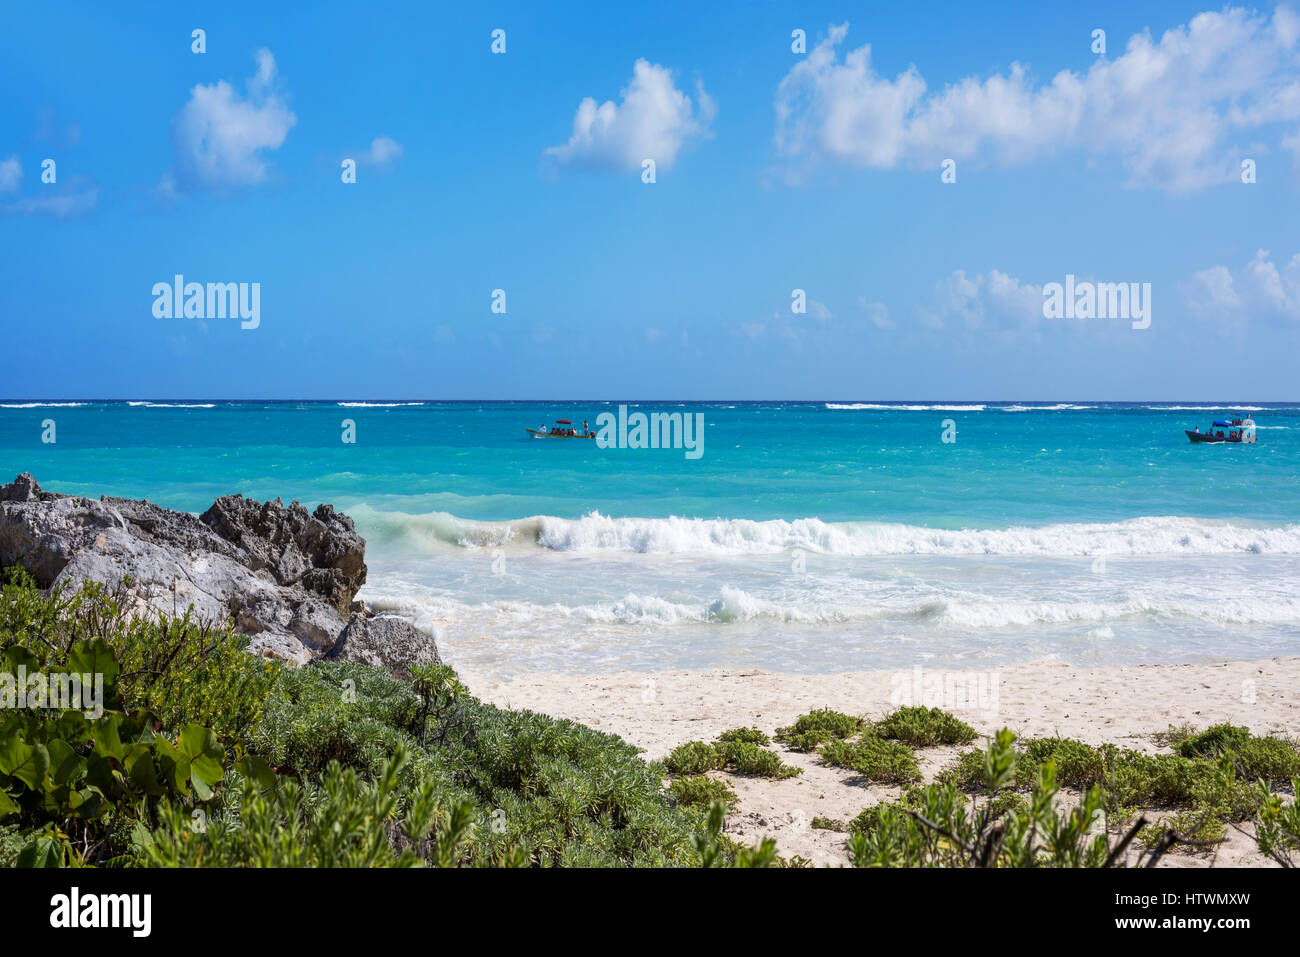 the Caribbean Sea and white sand beach in Tulum, Yucatan Peninsula, Mexico, with green grasses in the foreground Stock Photo